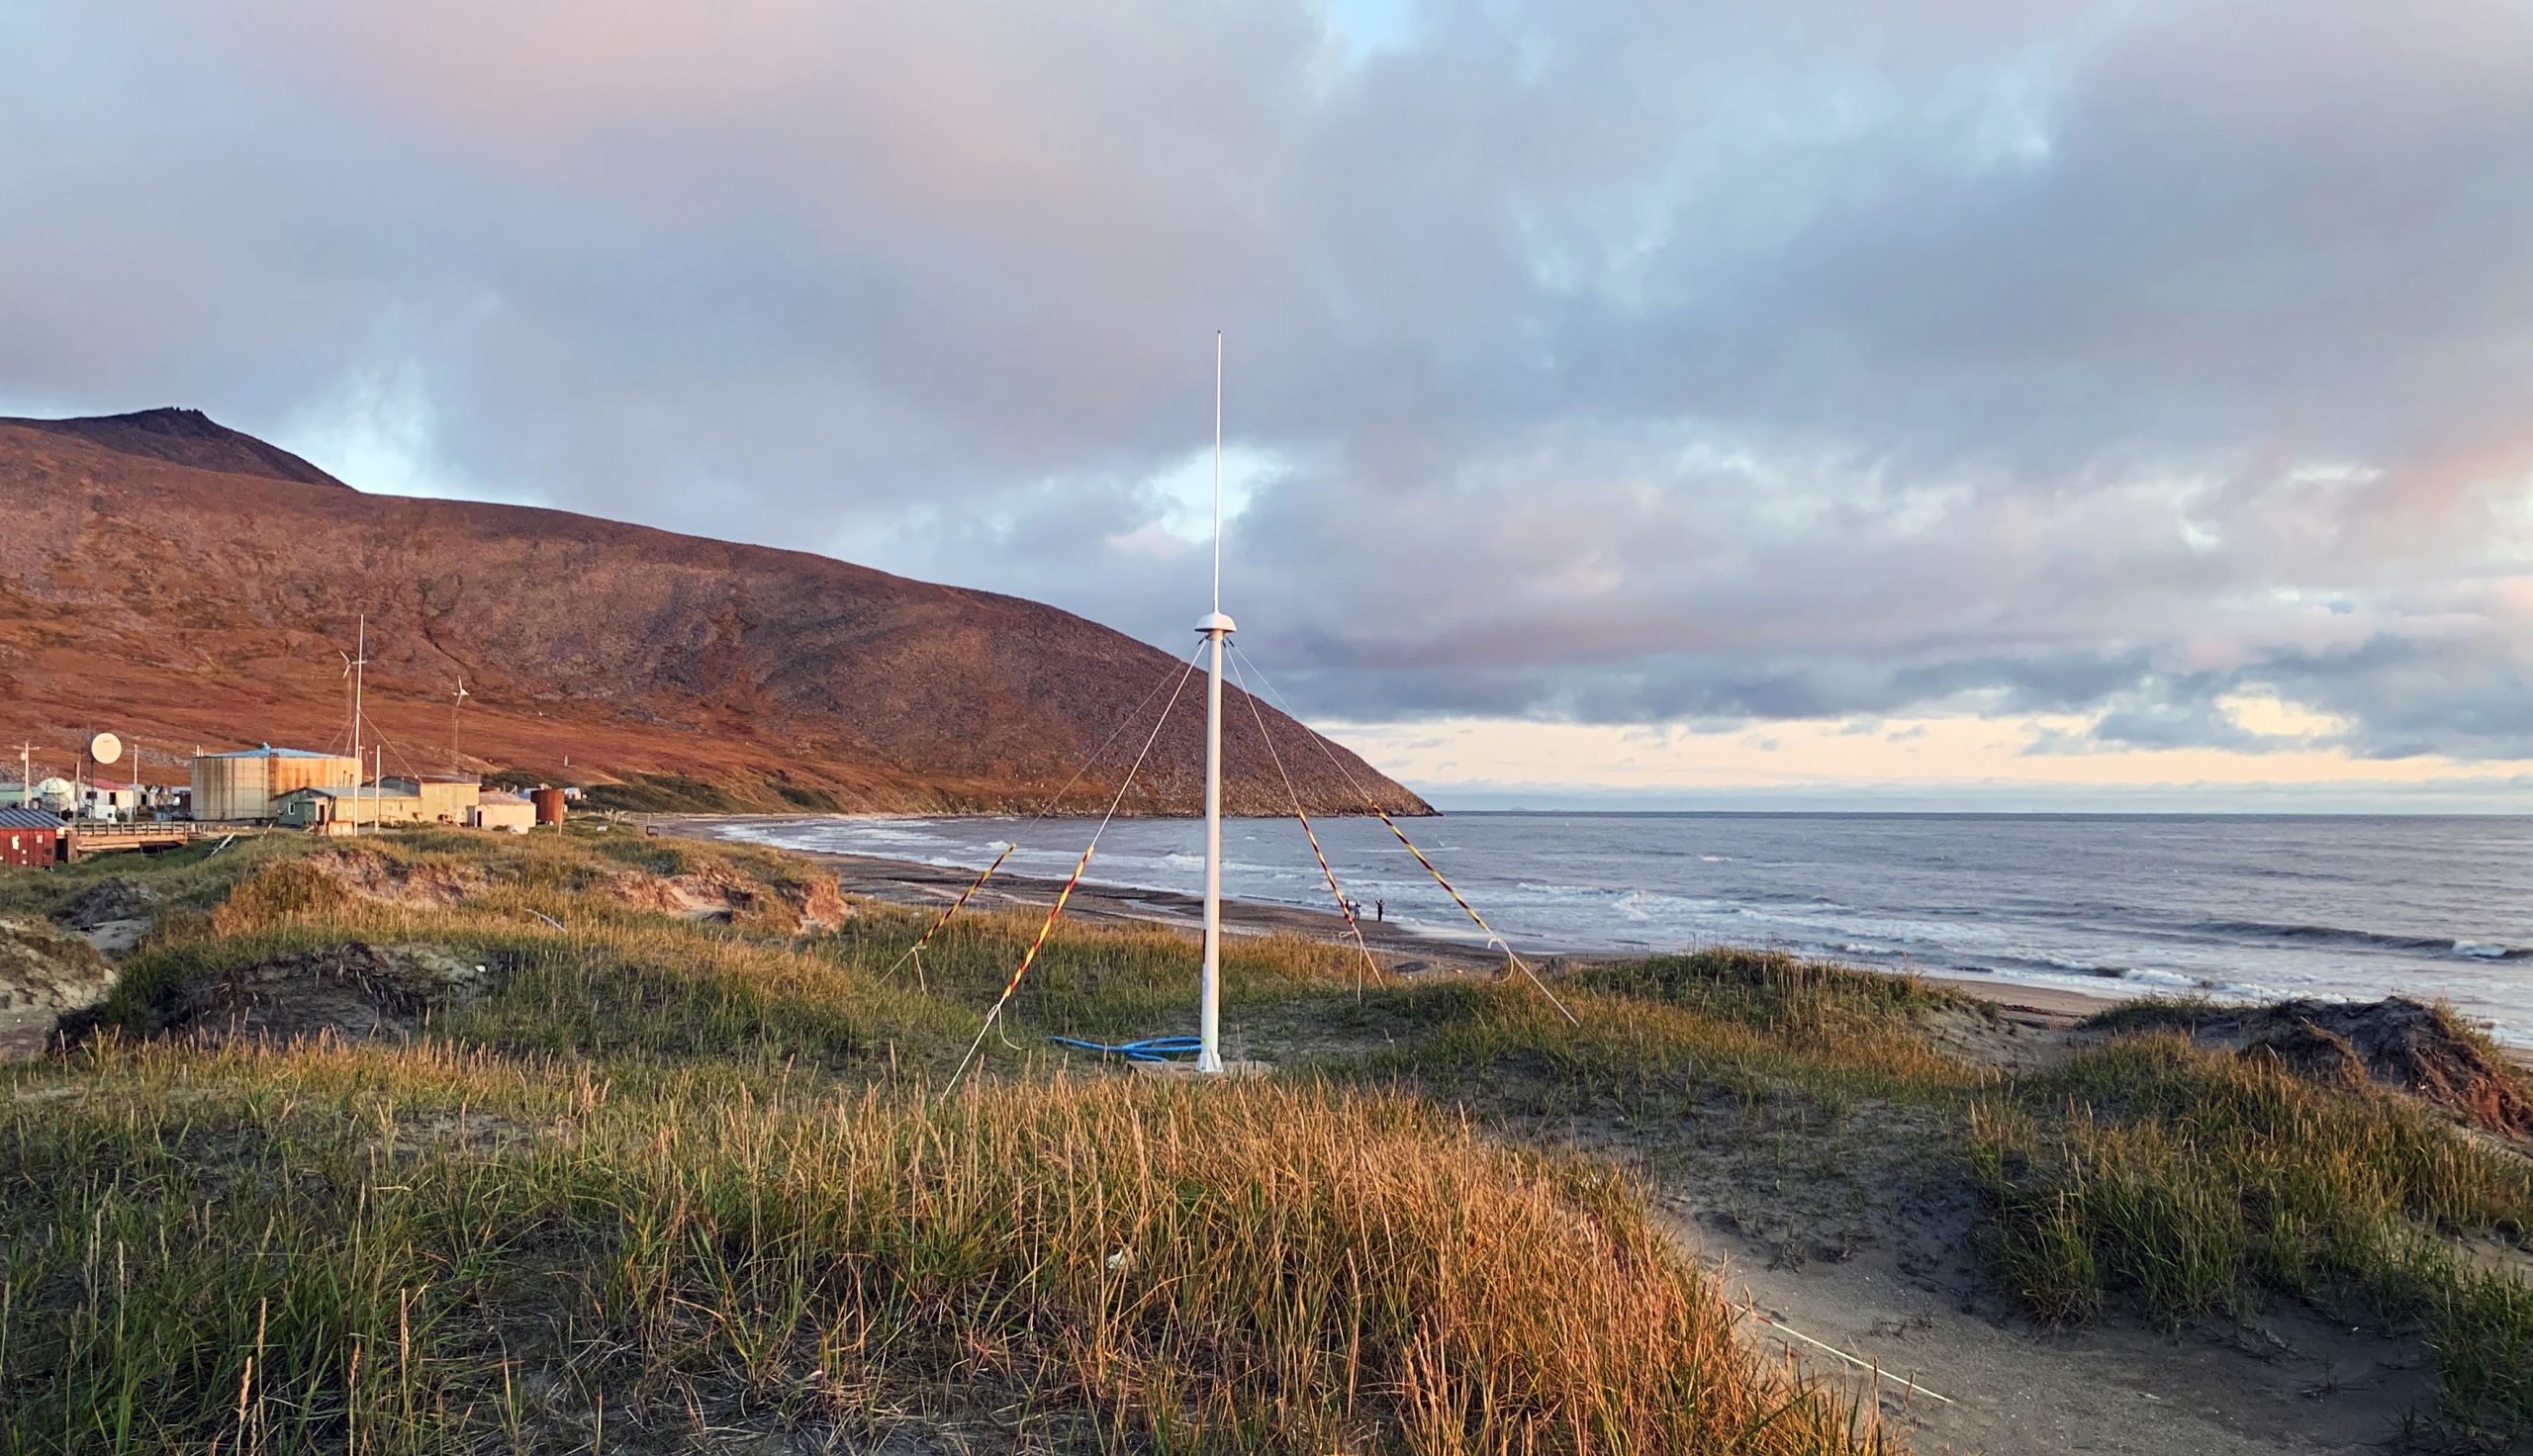 Photo by Hank Statscewich. High-frequency radar antennas measure surface currents in the Bering Strait from this location in the village of Wales.